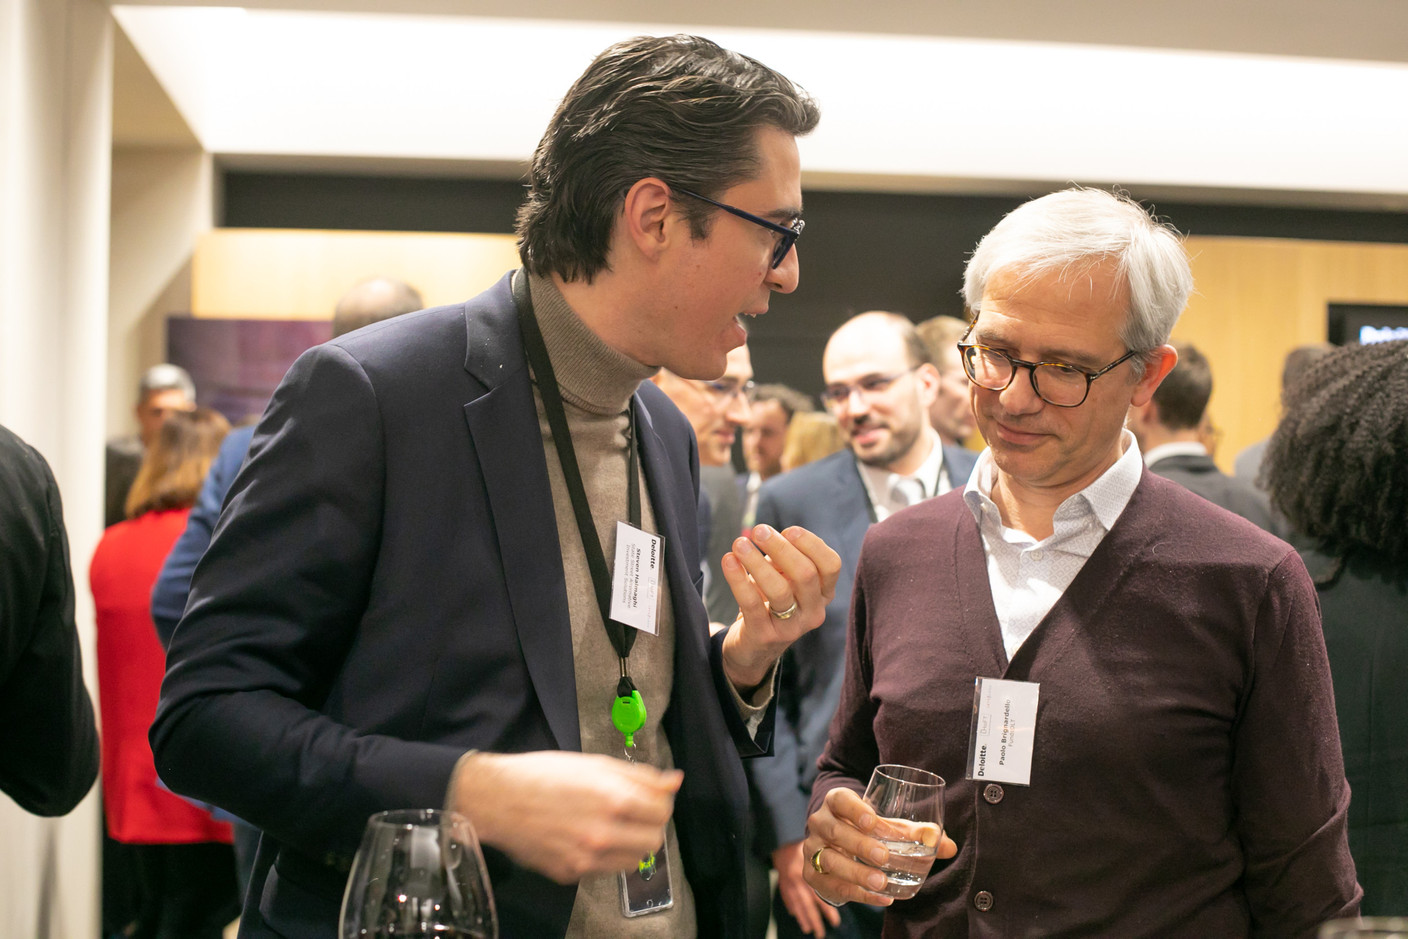 Steven Halmaghi of State Street and Paolo Brignardello of FundsDLT, seen at at Deloitte’s digital assets conference, 20 April 2023. Photo: Matic Zorman / Maison Moderne